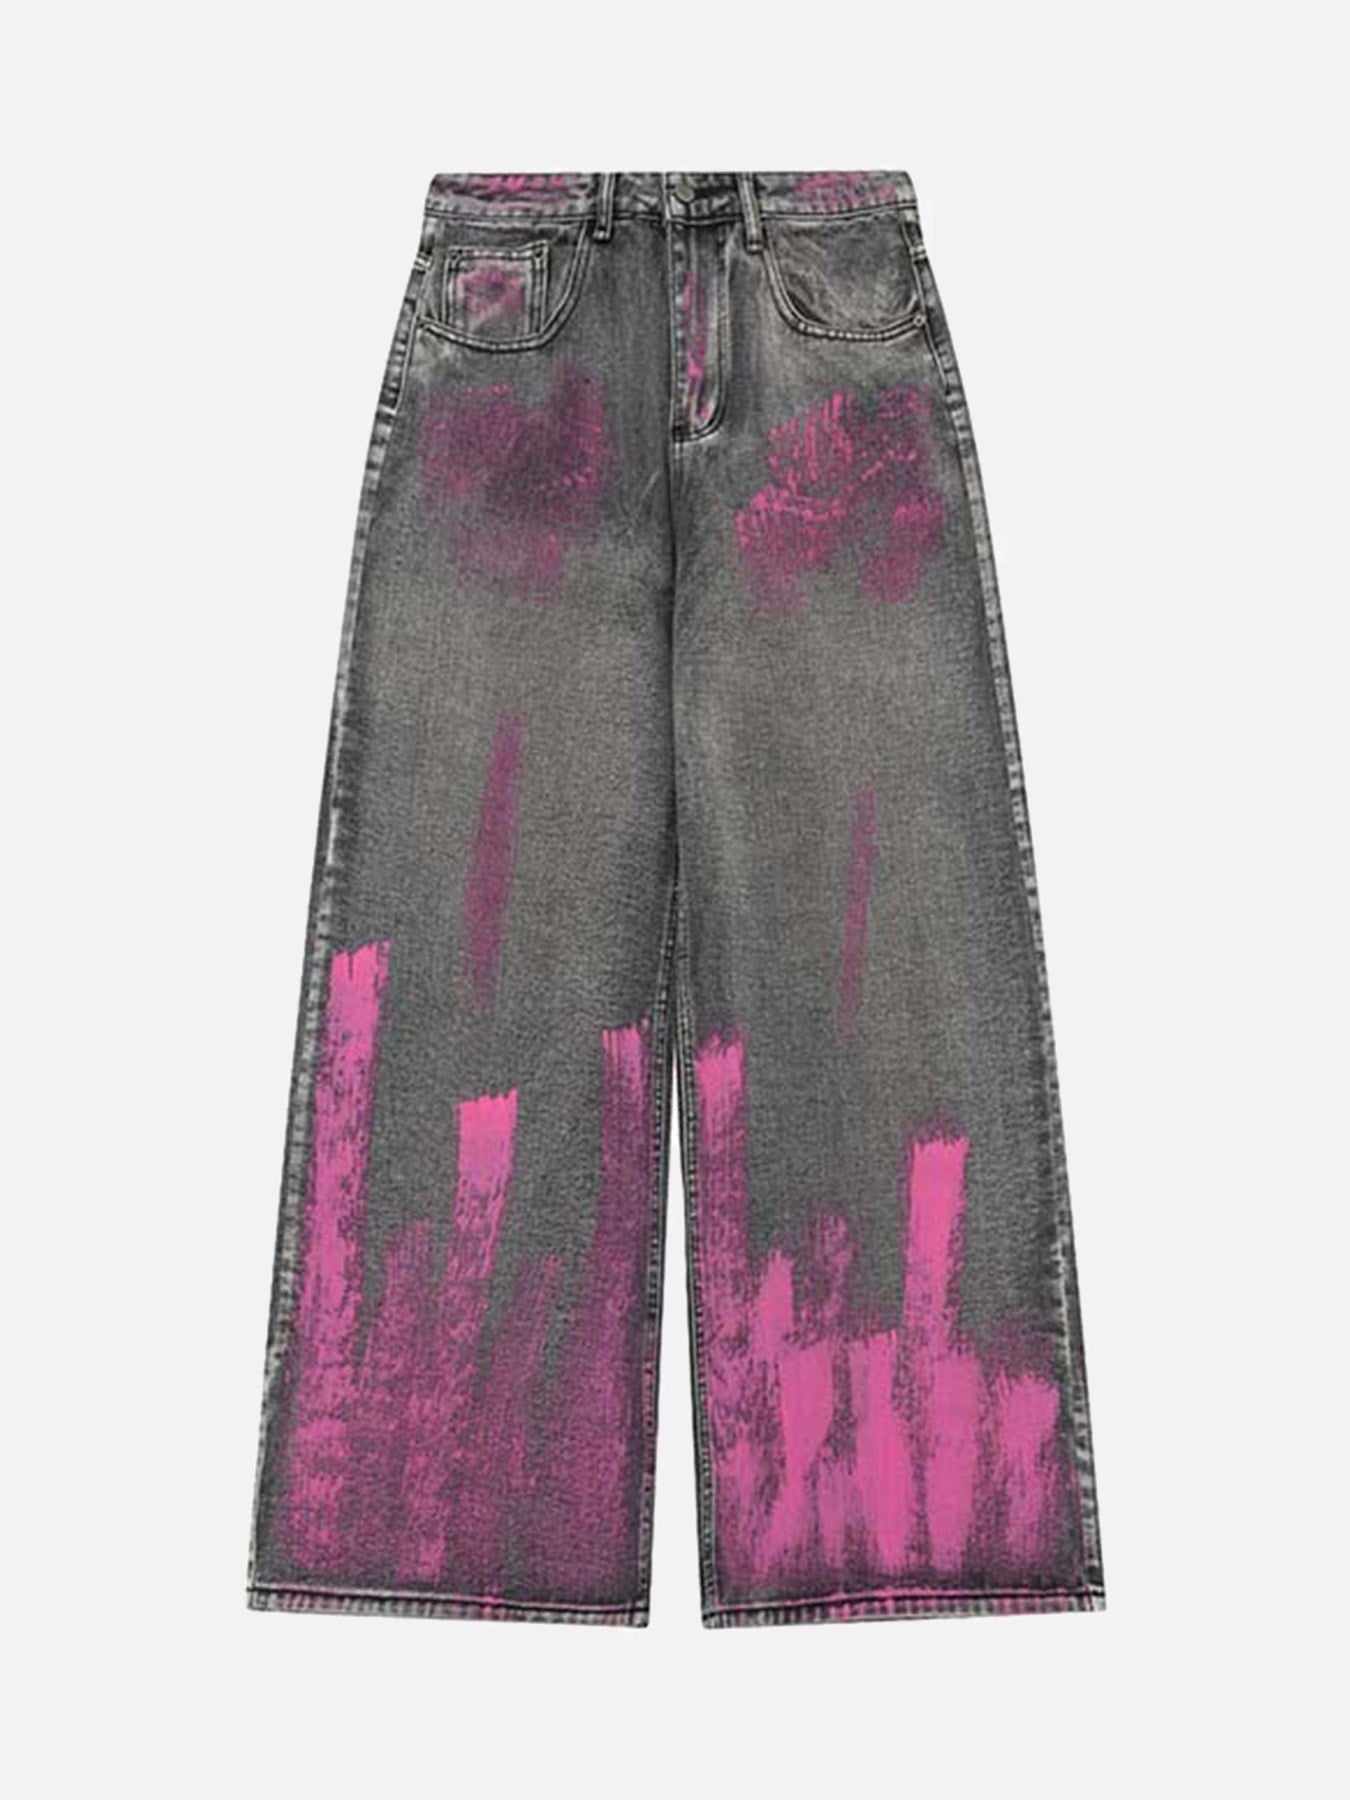 Thesupermade Graffiti Airbrushed Washed And Distressed Jeans - 1886